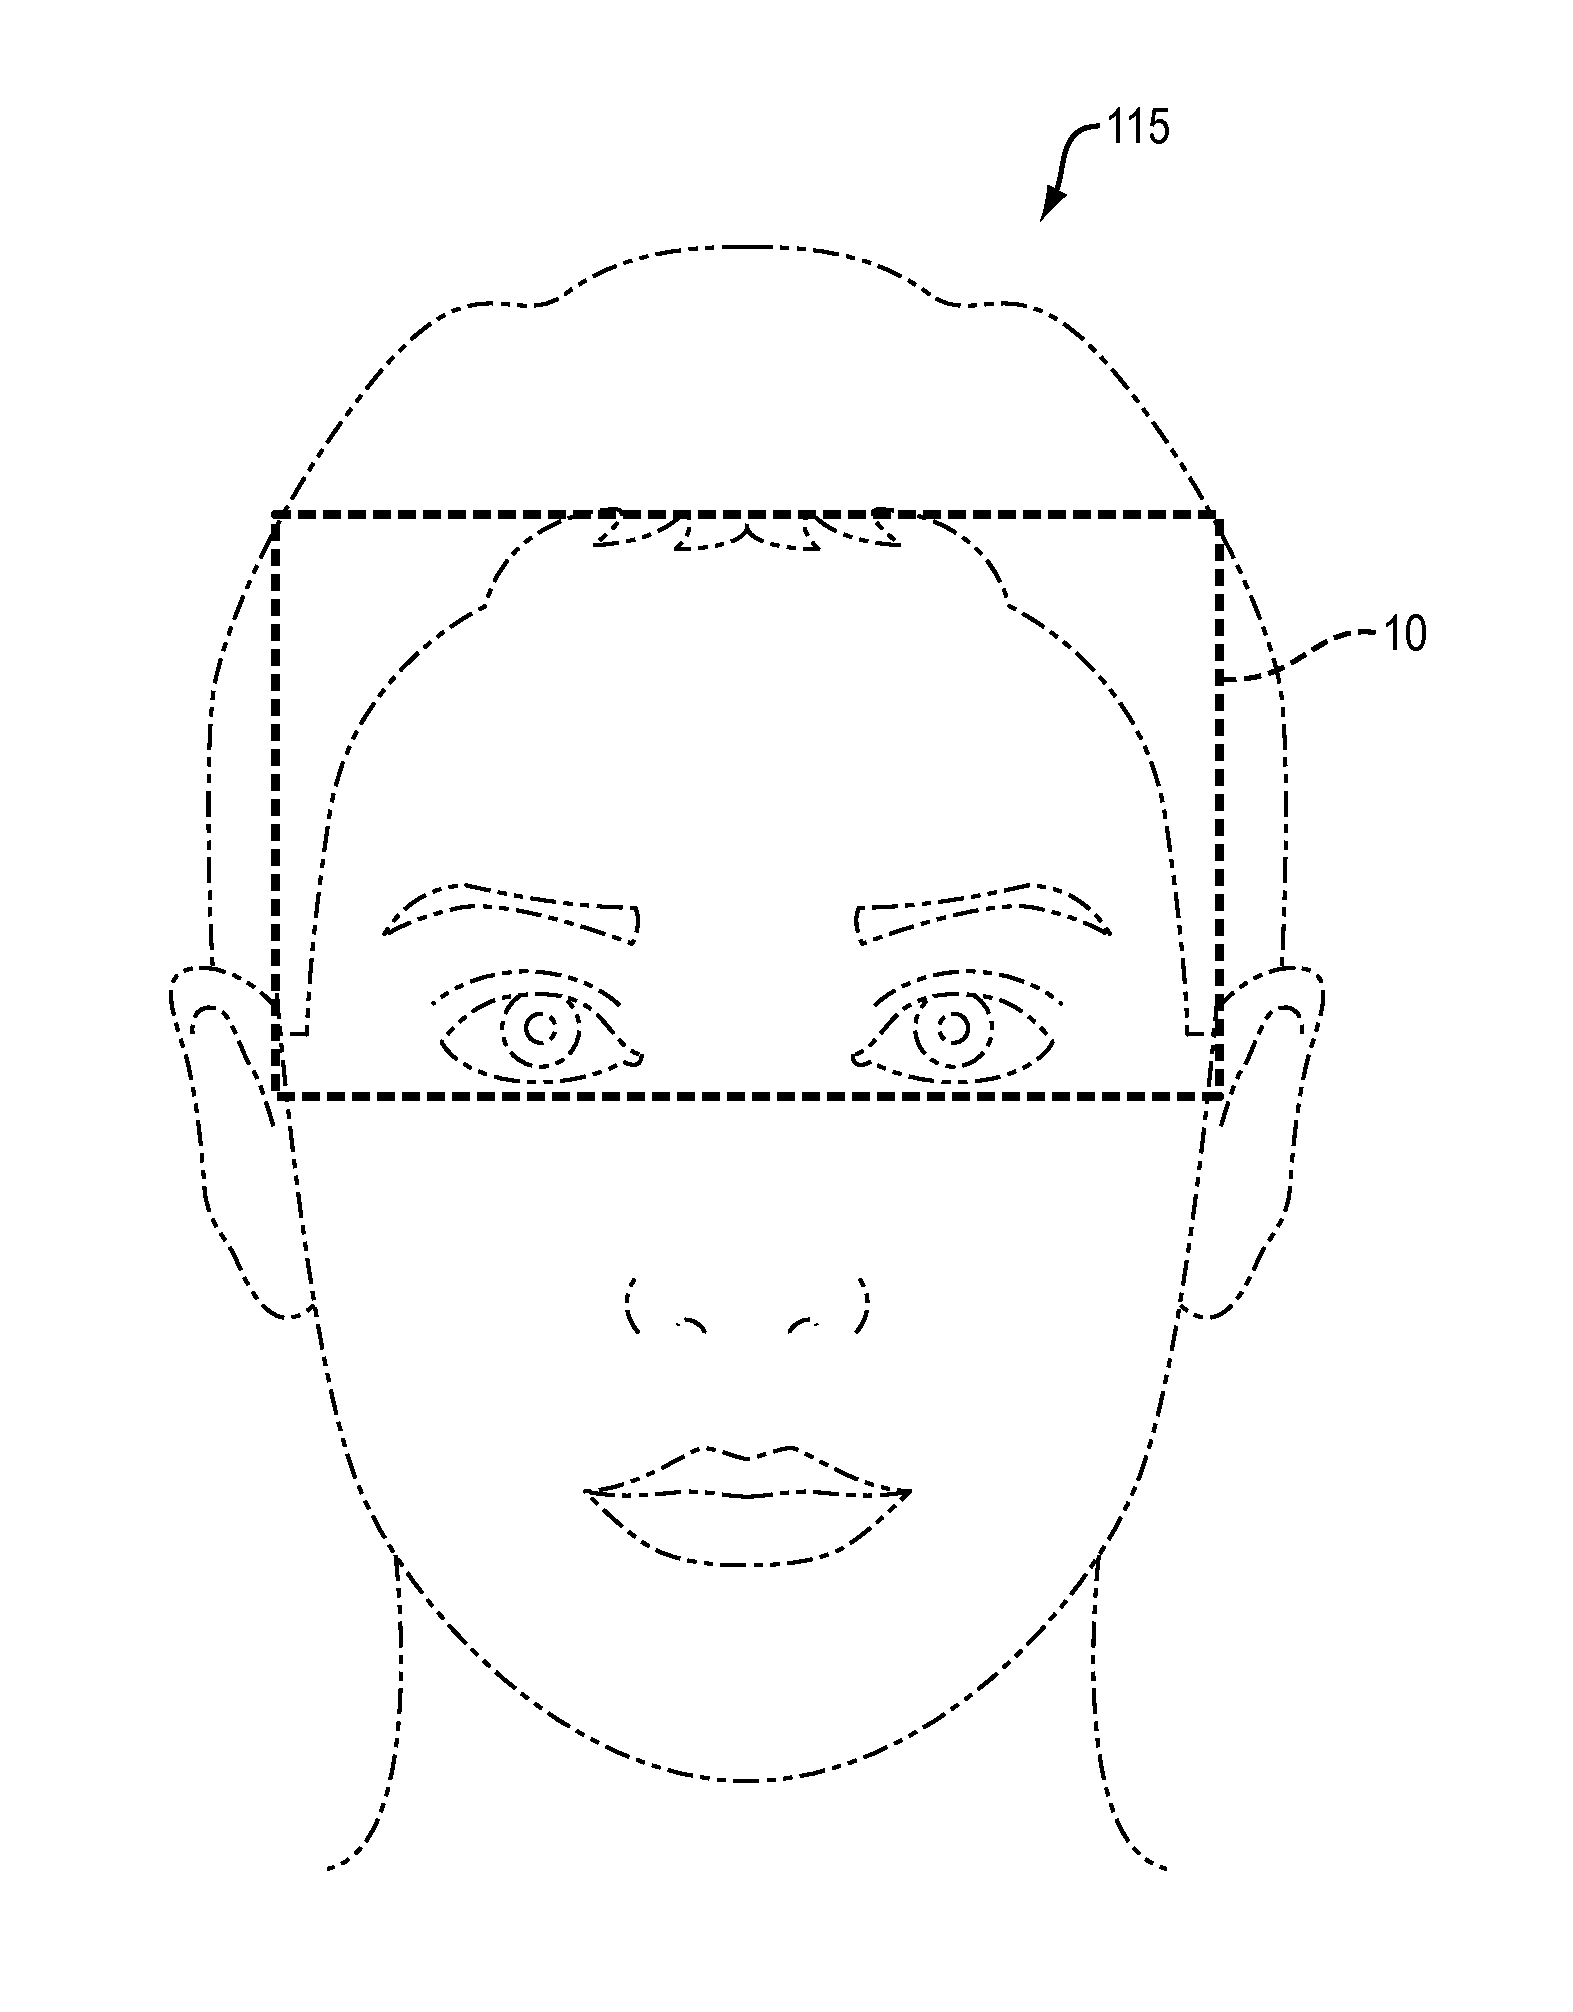 Methods Of Measuring Head, Neck, and Brain Function And Predicting And Diagnosing Memory Impairment